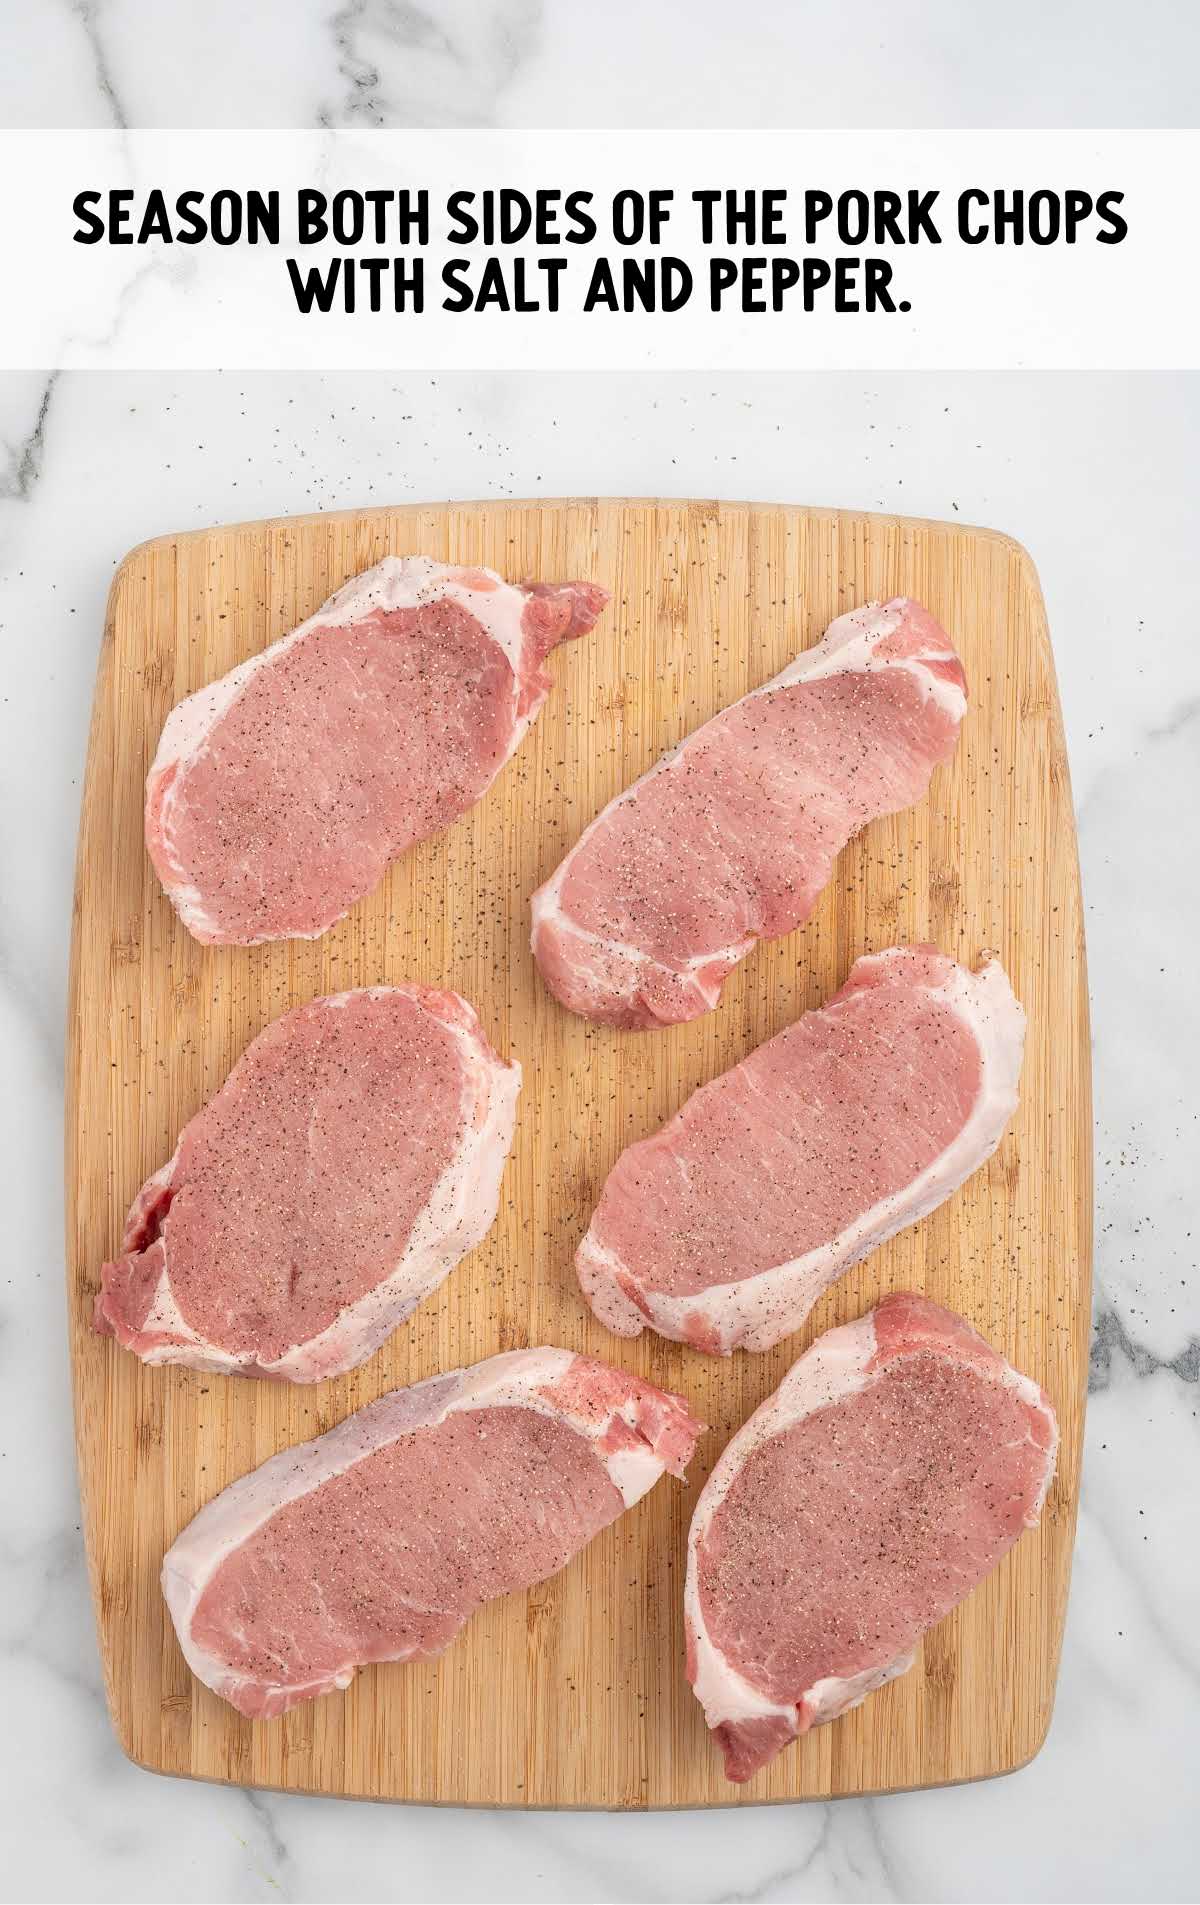 pork chops seasoned with salt and pepper on a wooden board